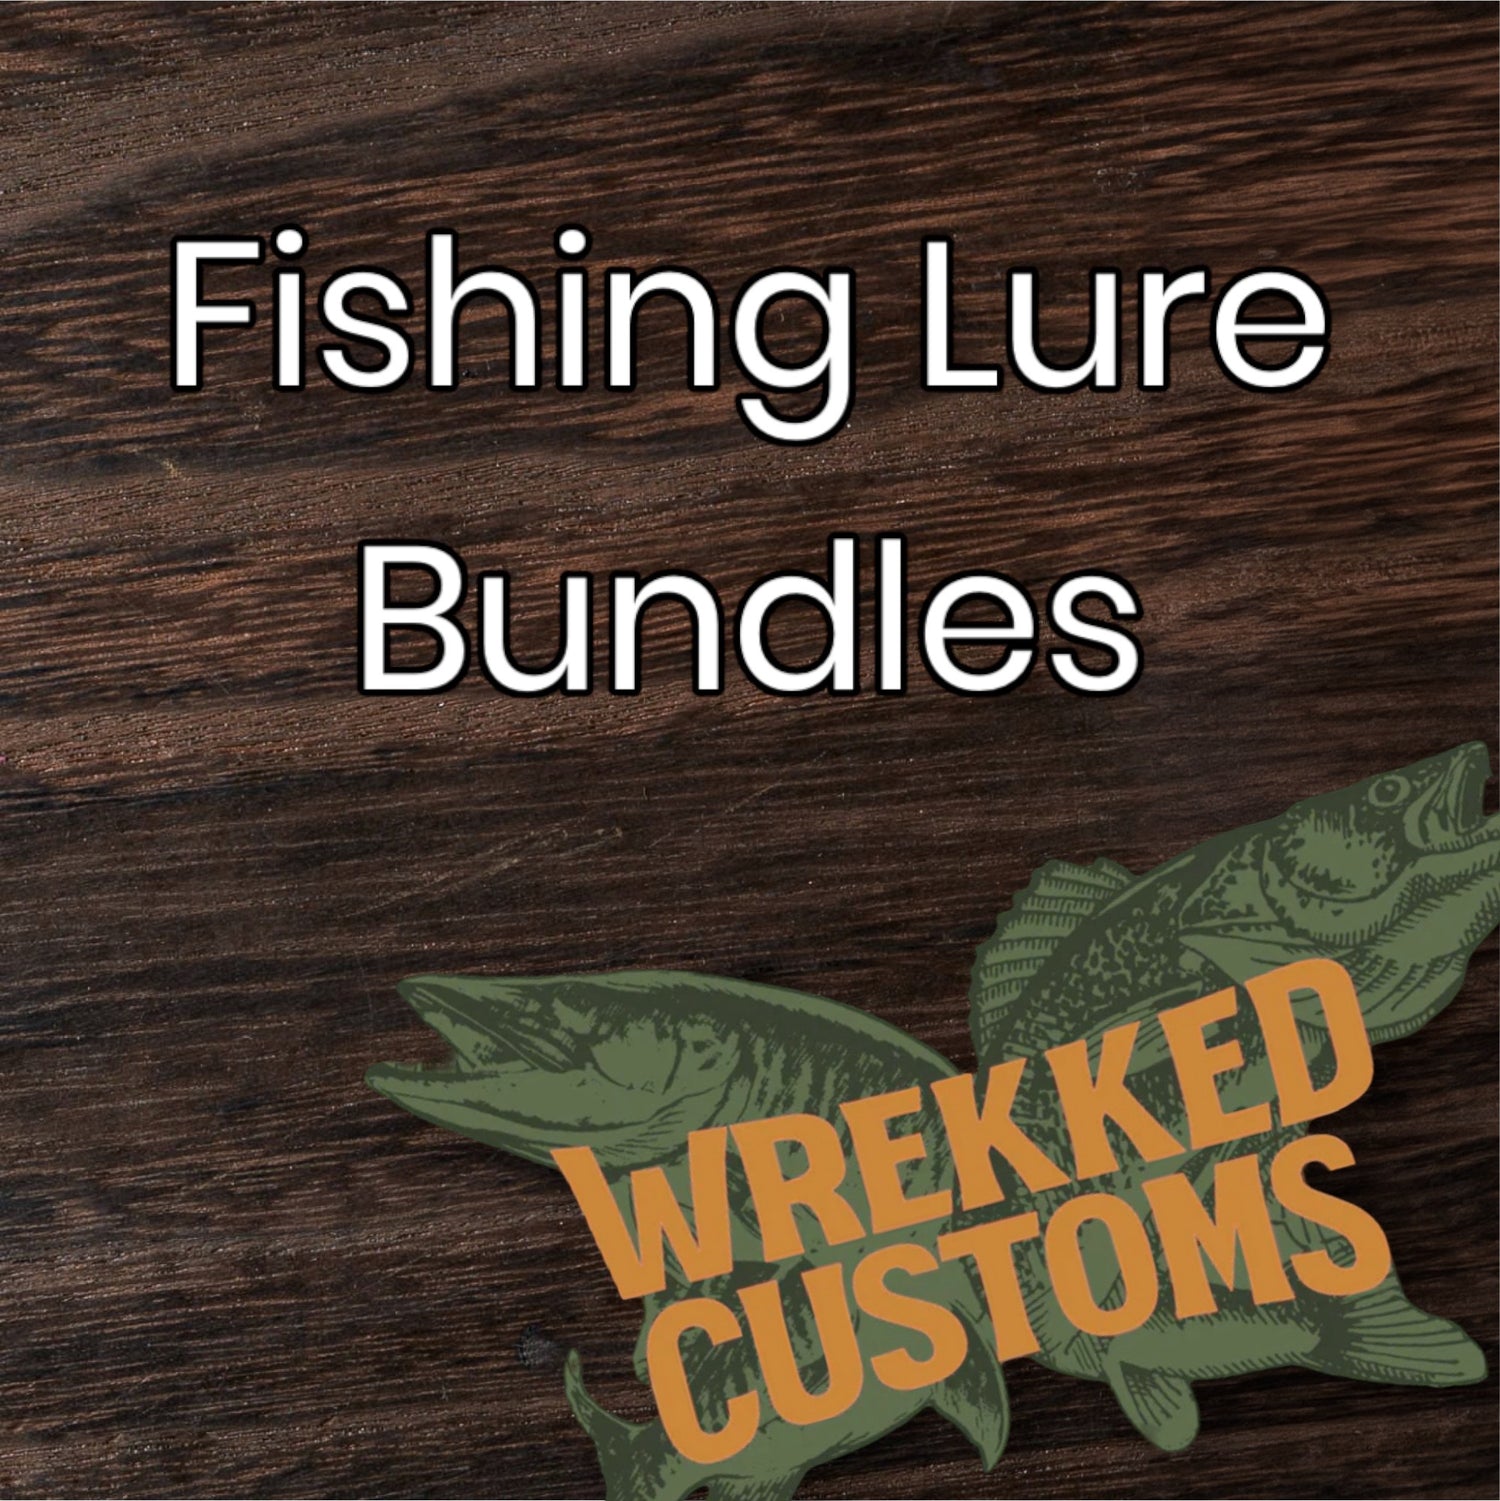 Fishing Collections – Wrekked Customs LLC